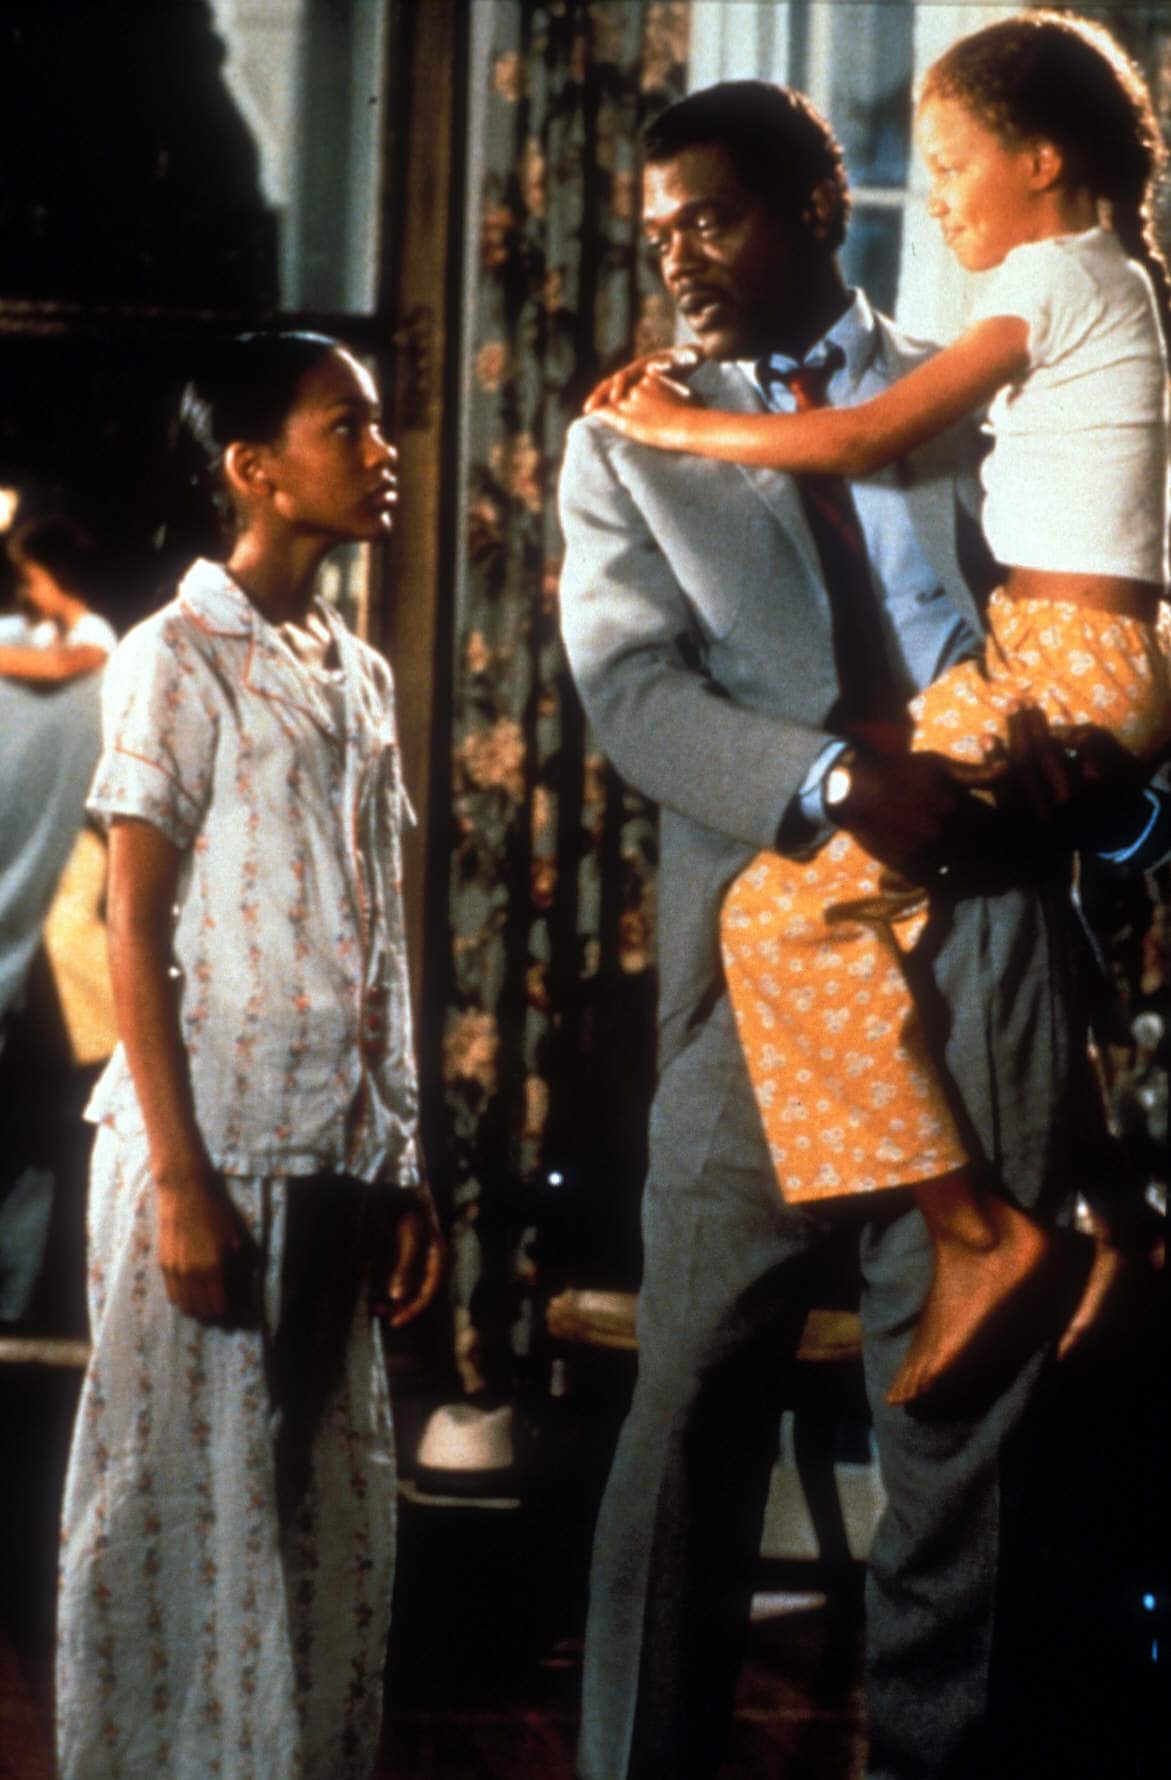 Eve's Bayou is a 1997 Southern Gothic drama film written and directed by Kasi Lemmons, which premiered at the 1997 Toronto International Film Festival and was commercially successful, grossing $14 million domestically on a budget of $4 million